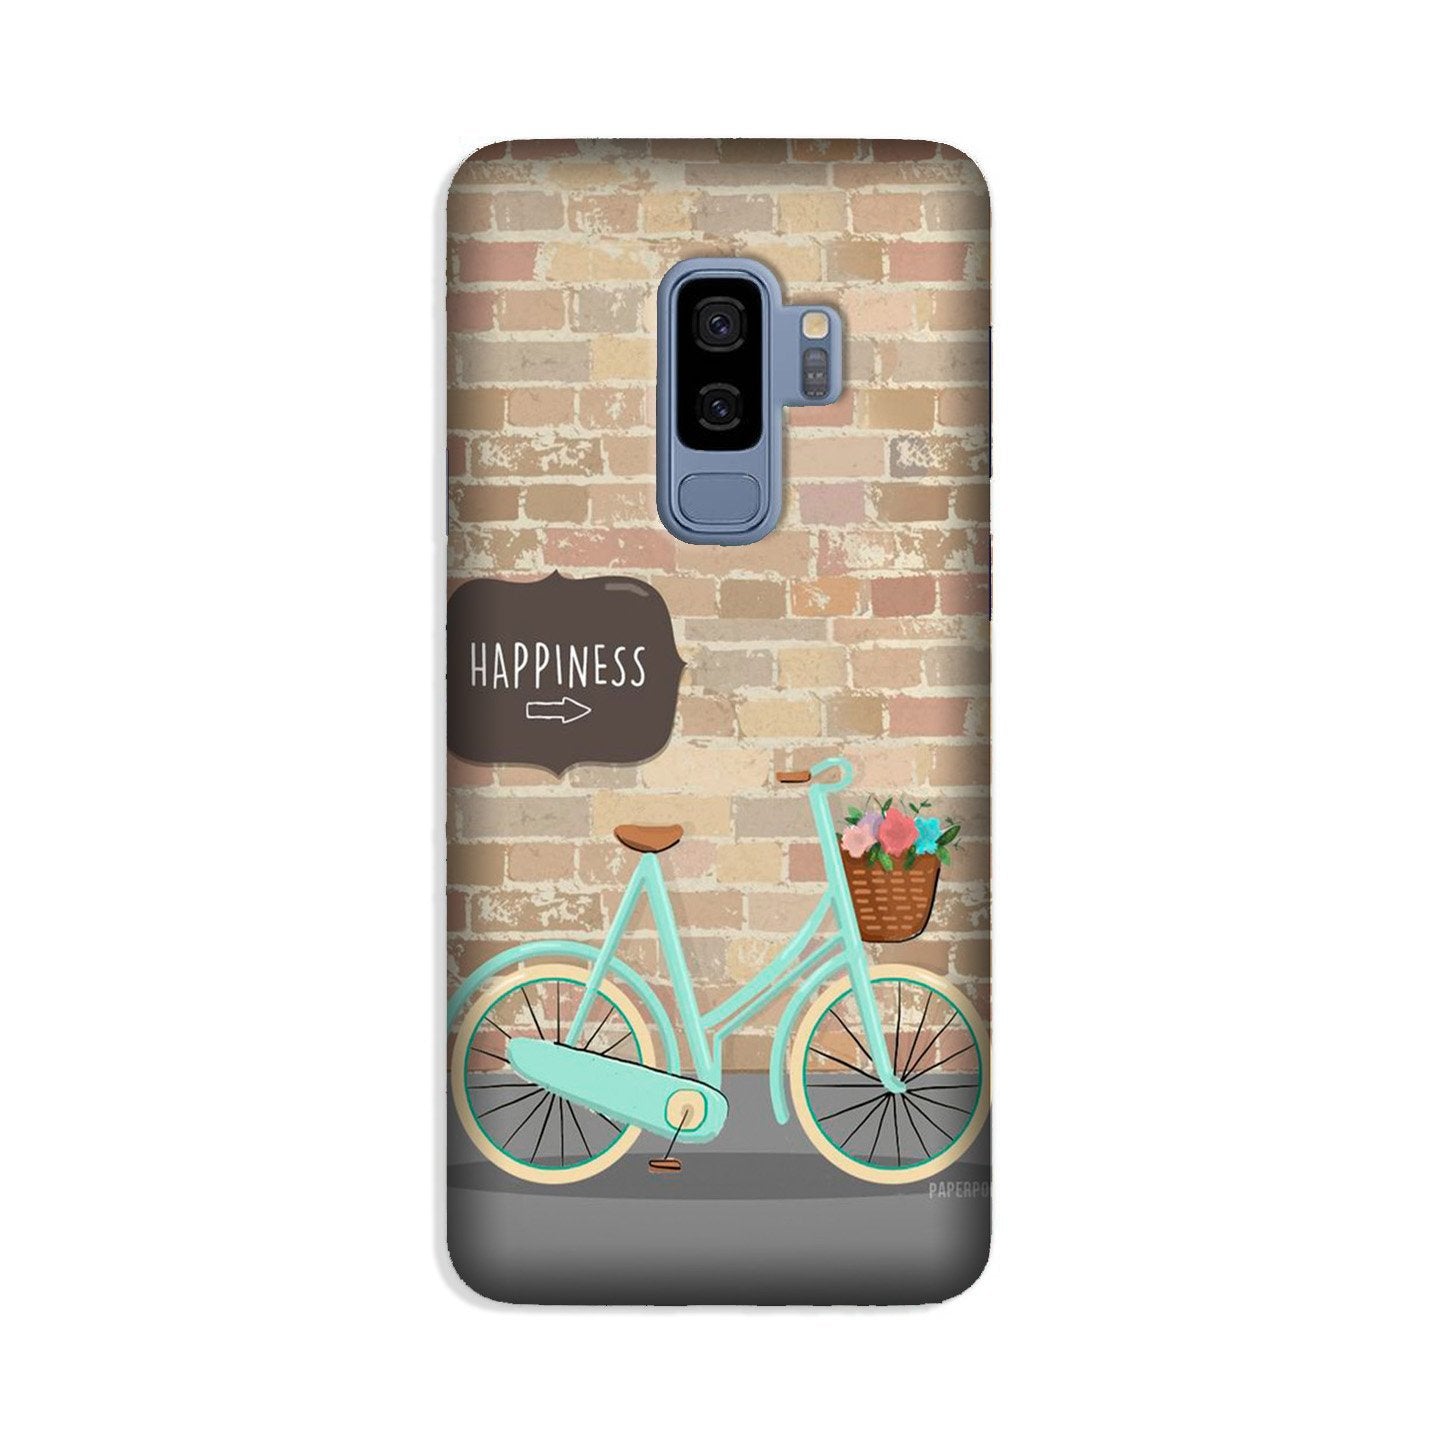 Happiness Case for Galaxy S9 Plus